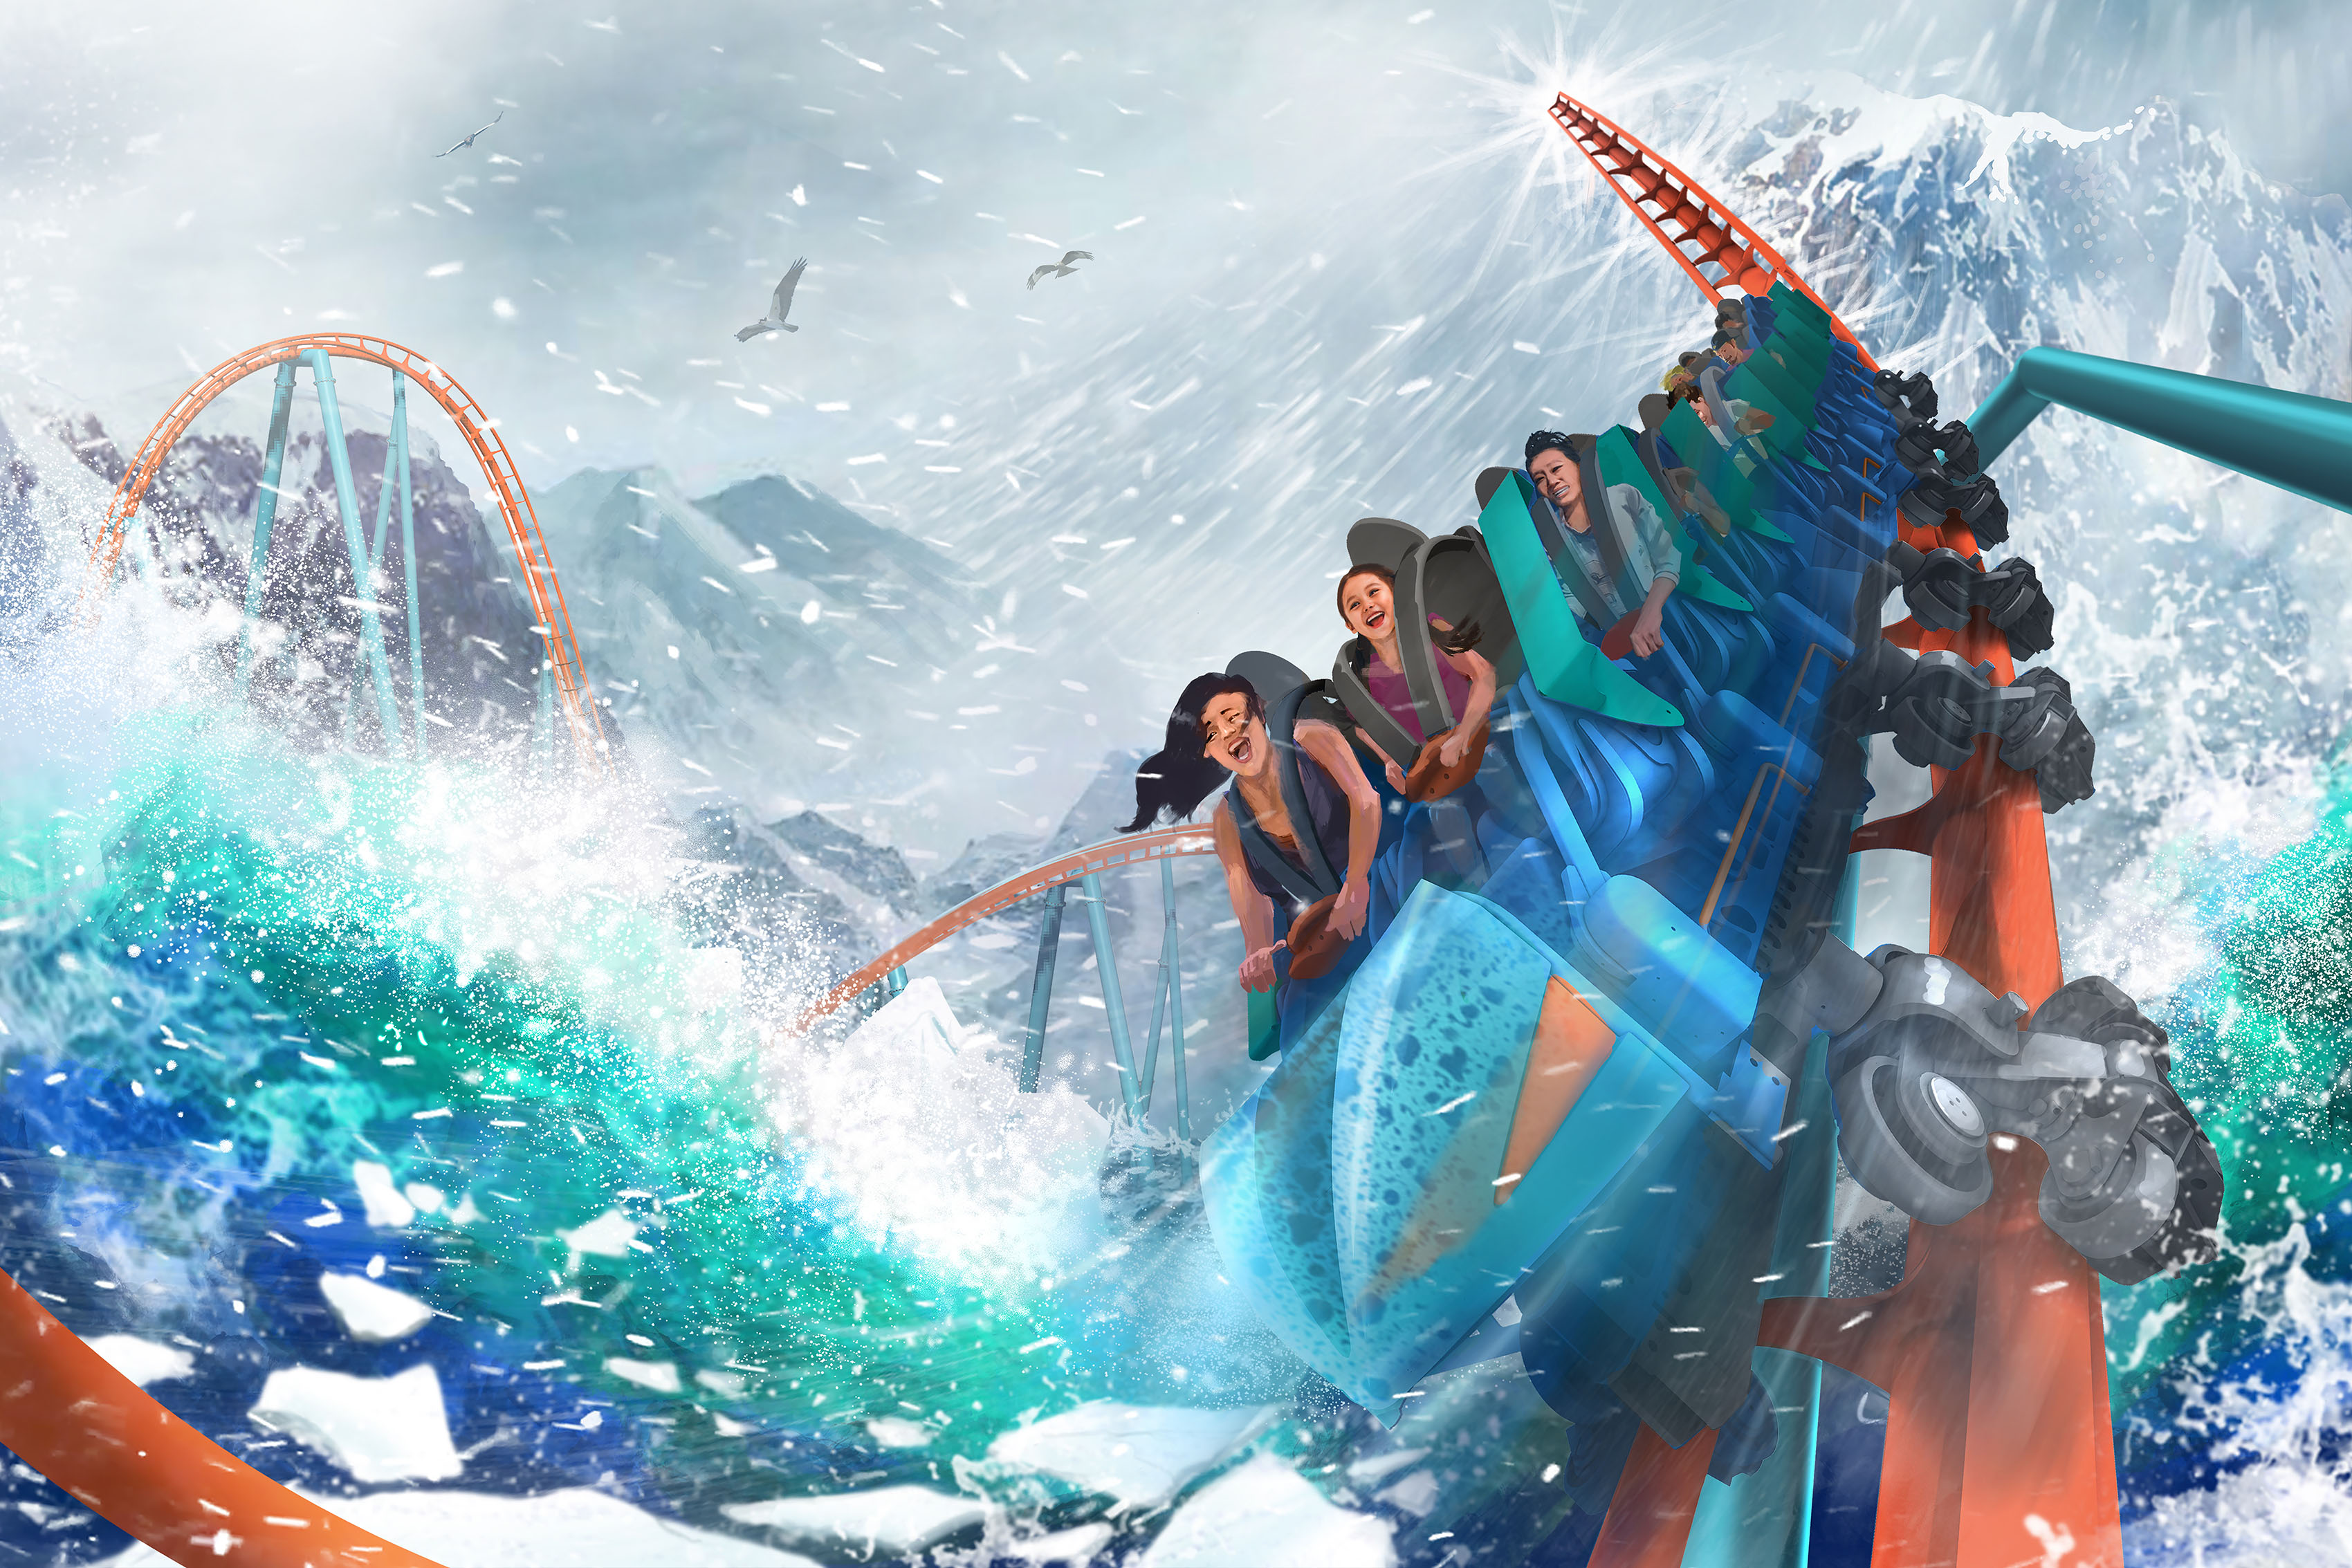 Adrenaline rush New roller coasters amplify thrills at Seaworld and